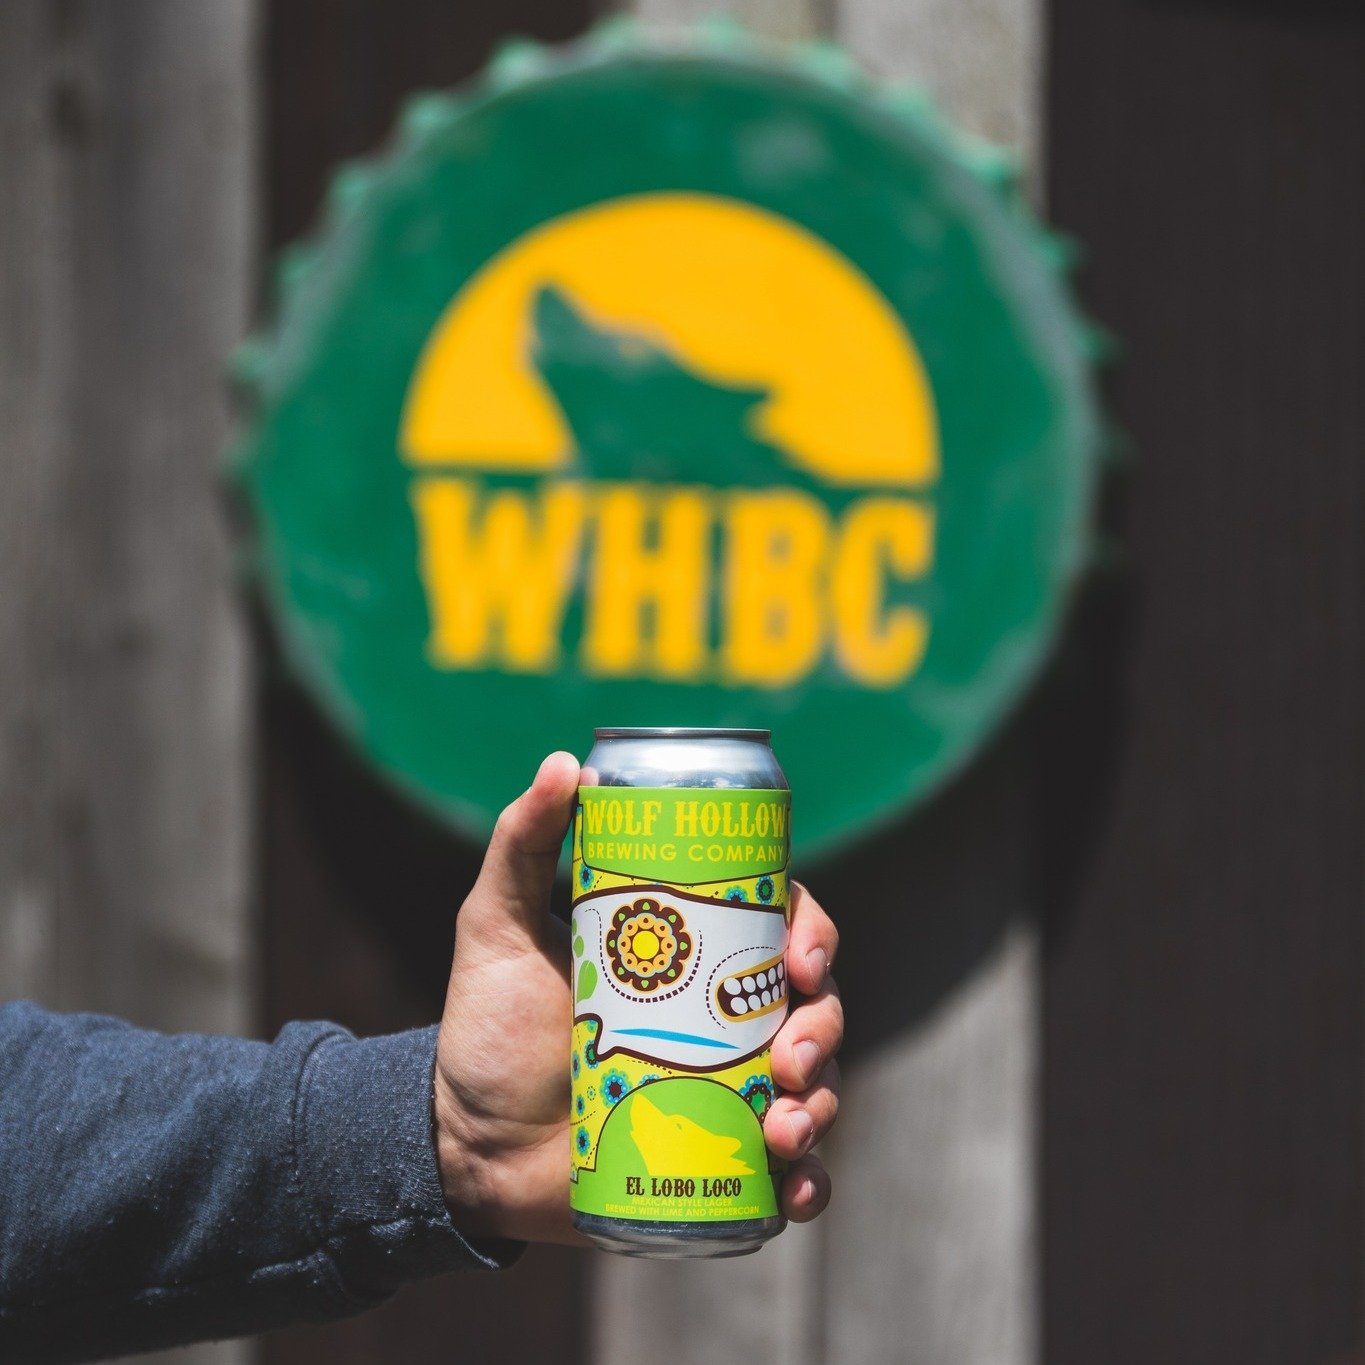 Lobo Loco week has arrived! A sure sign that warm weather and good times are on the way, our summer lager brewed with peppercorn and lime is perfect for those hot summer days ahead. Available on draft and in 4-packs Wednesday. #summer #lager #new #cr